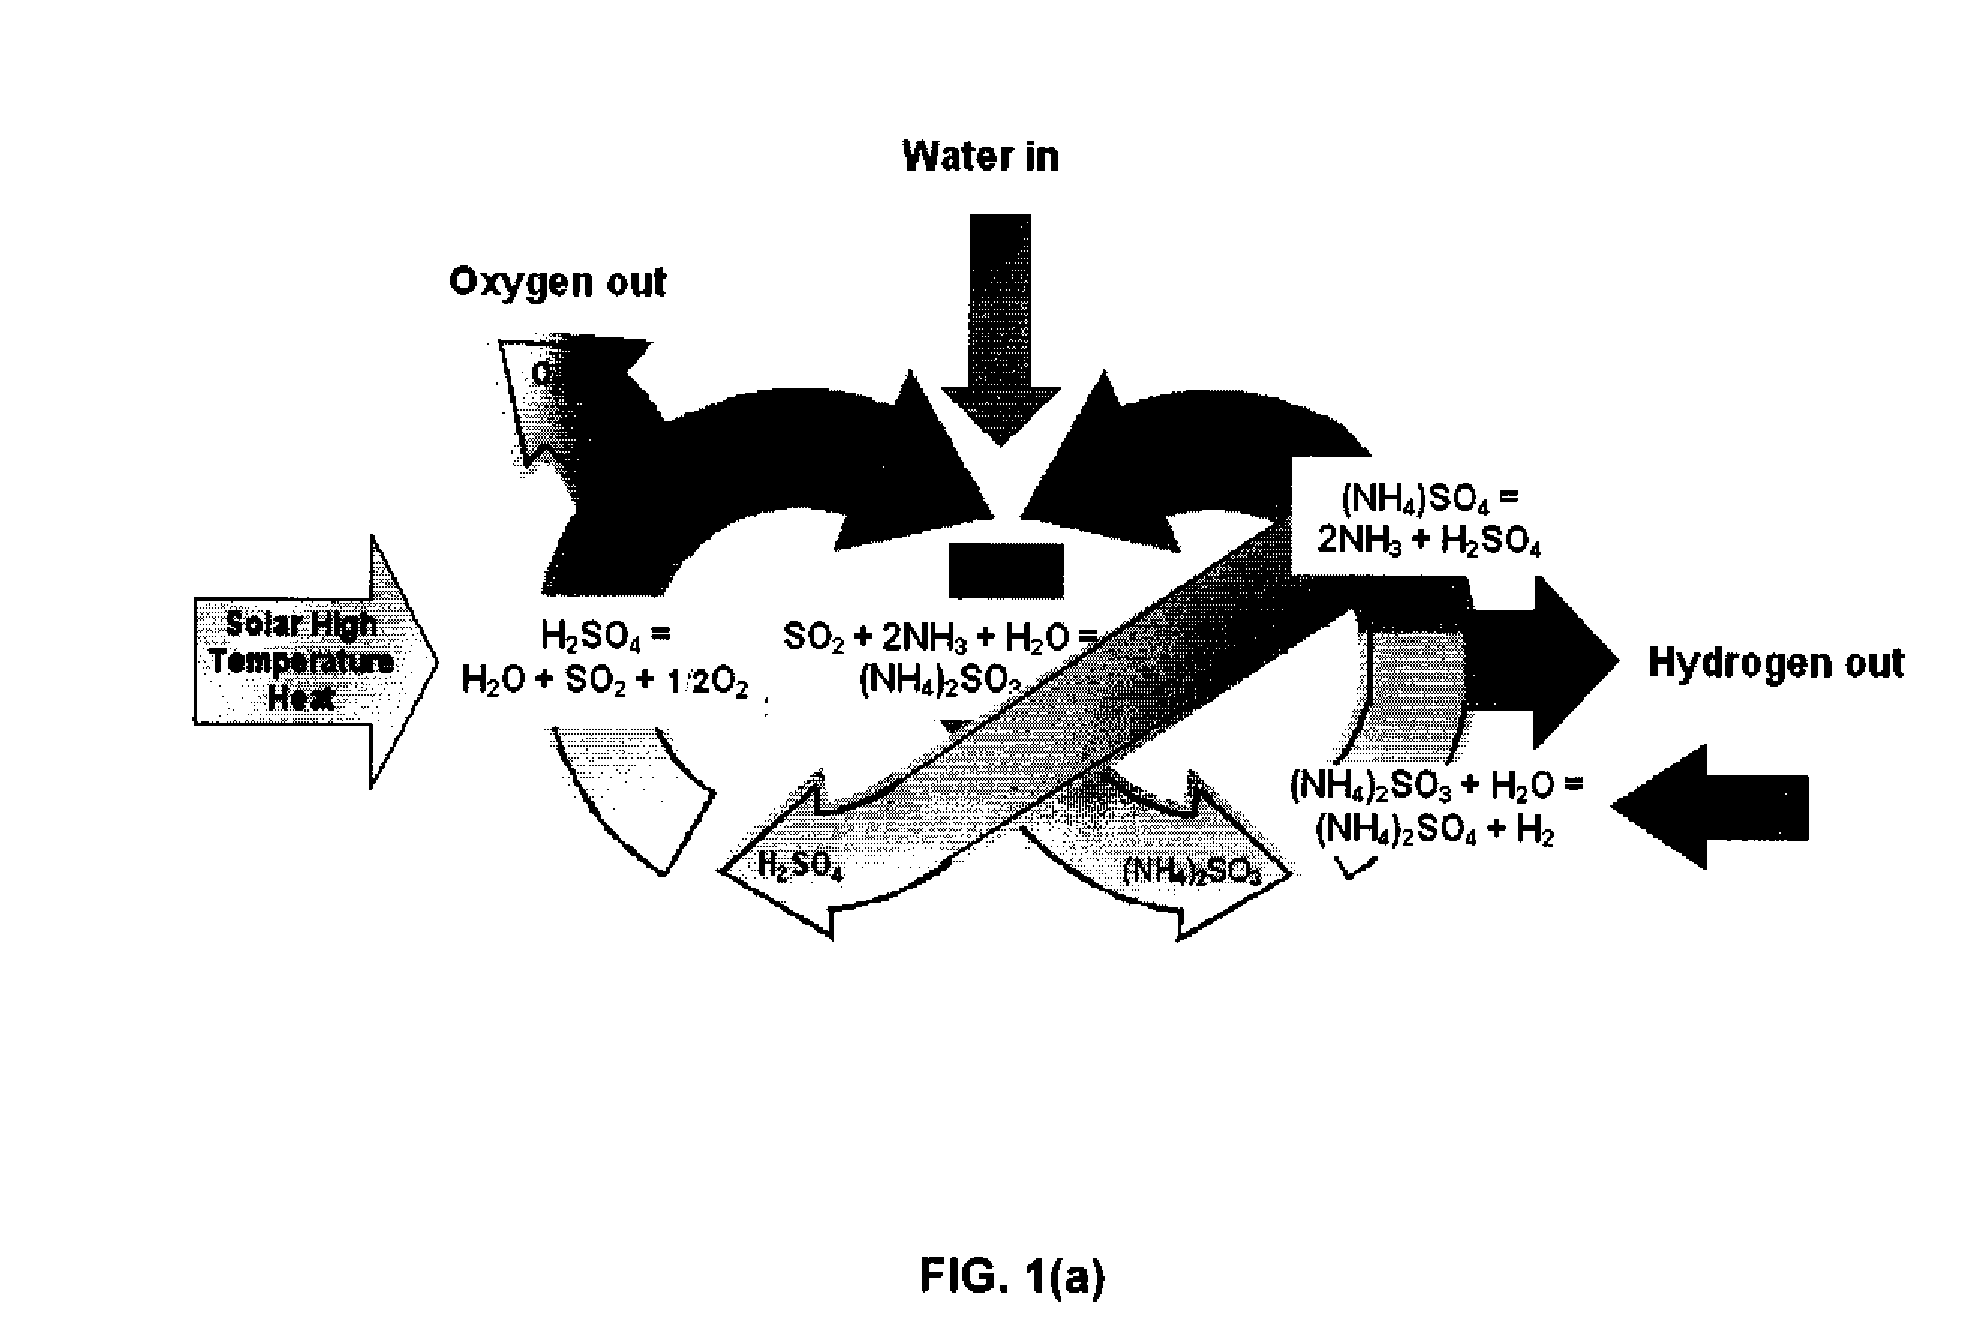 Thermochemical Cycle for Production of Hydrogen and/or Oxygen Via Water Splitting Processes